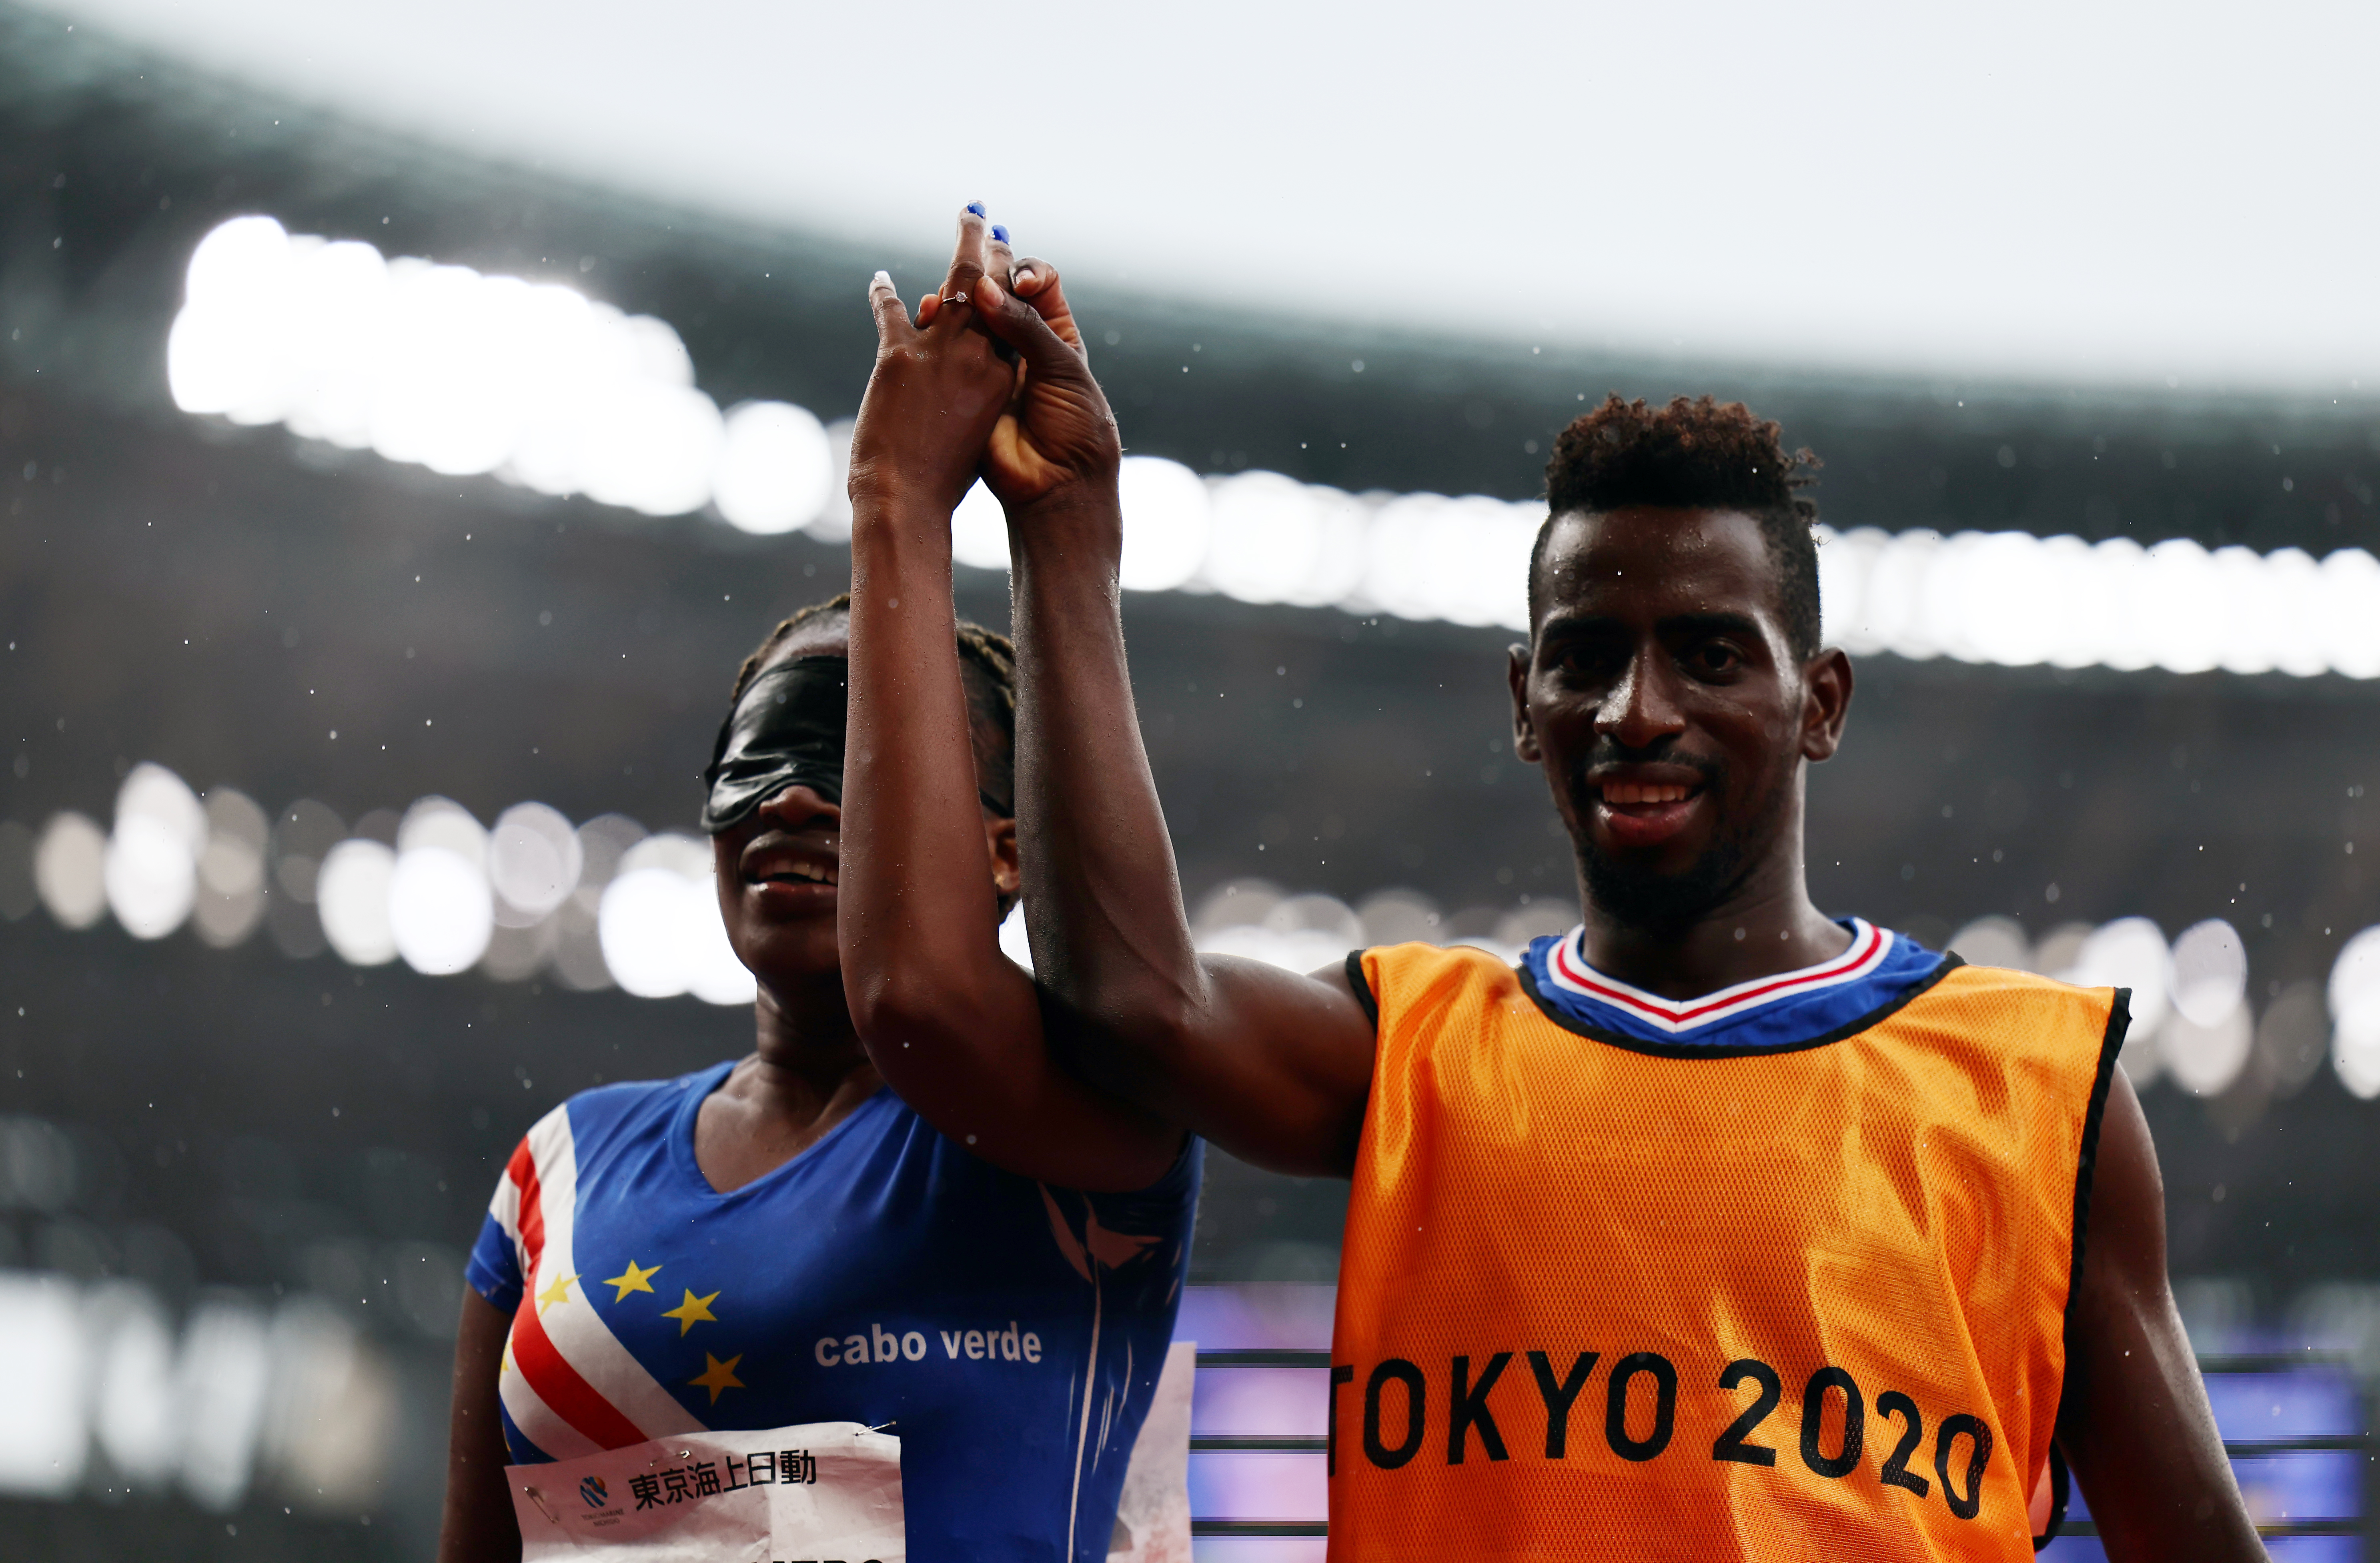 Tokyo 2020 Paralympic Games - Athletics - Women's 200m - T11 Round 1 - Heat 4 - Olympic Stadium, Tokyo, Japan - September 2, 2021. Keula Nidreia Pereira Semedo of Cape Verde displays her ring after her guide Manuel Antonio Vaz da Veiga proposed after competing REUTERS/Athit Perawongmetha